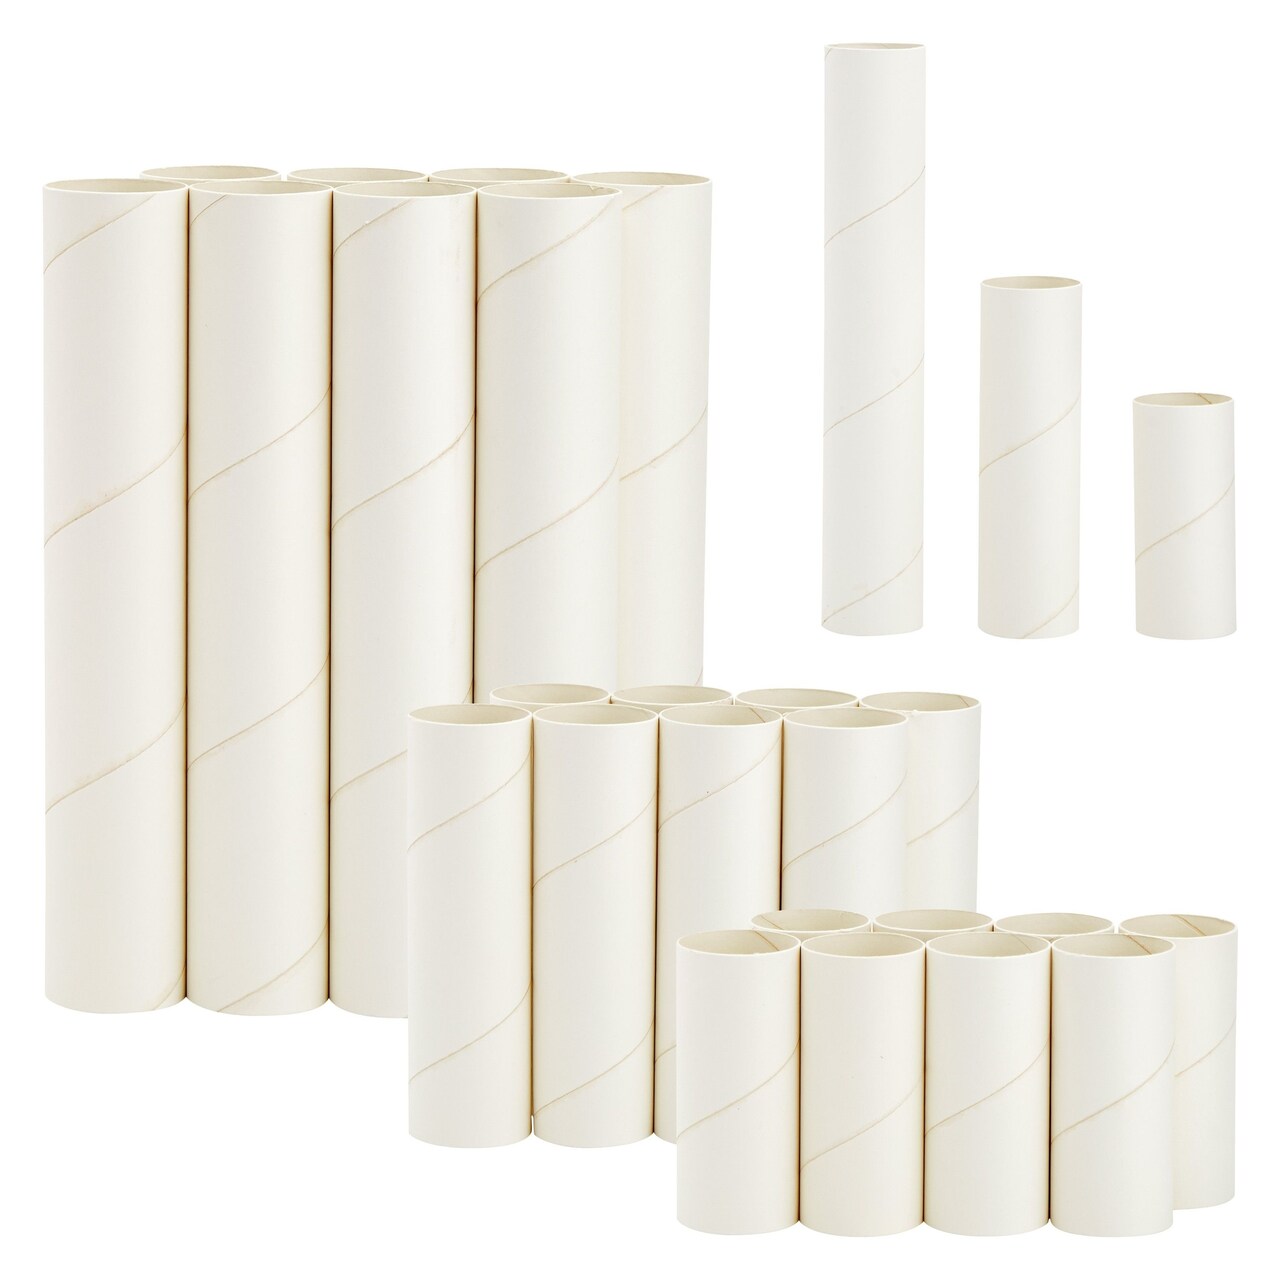 24 White Cardboard Tubes for Crafts, Empty Paper Rolls, Cylinders